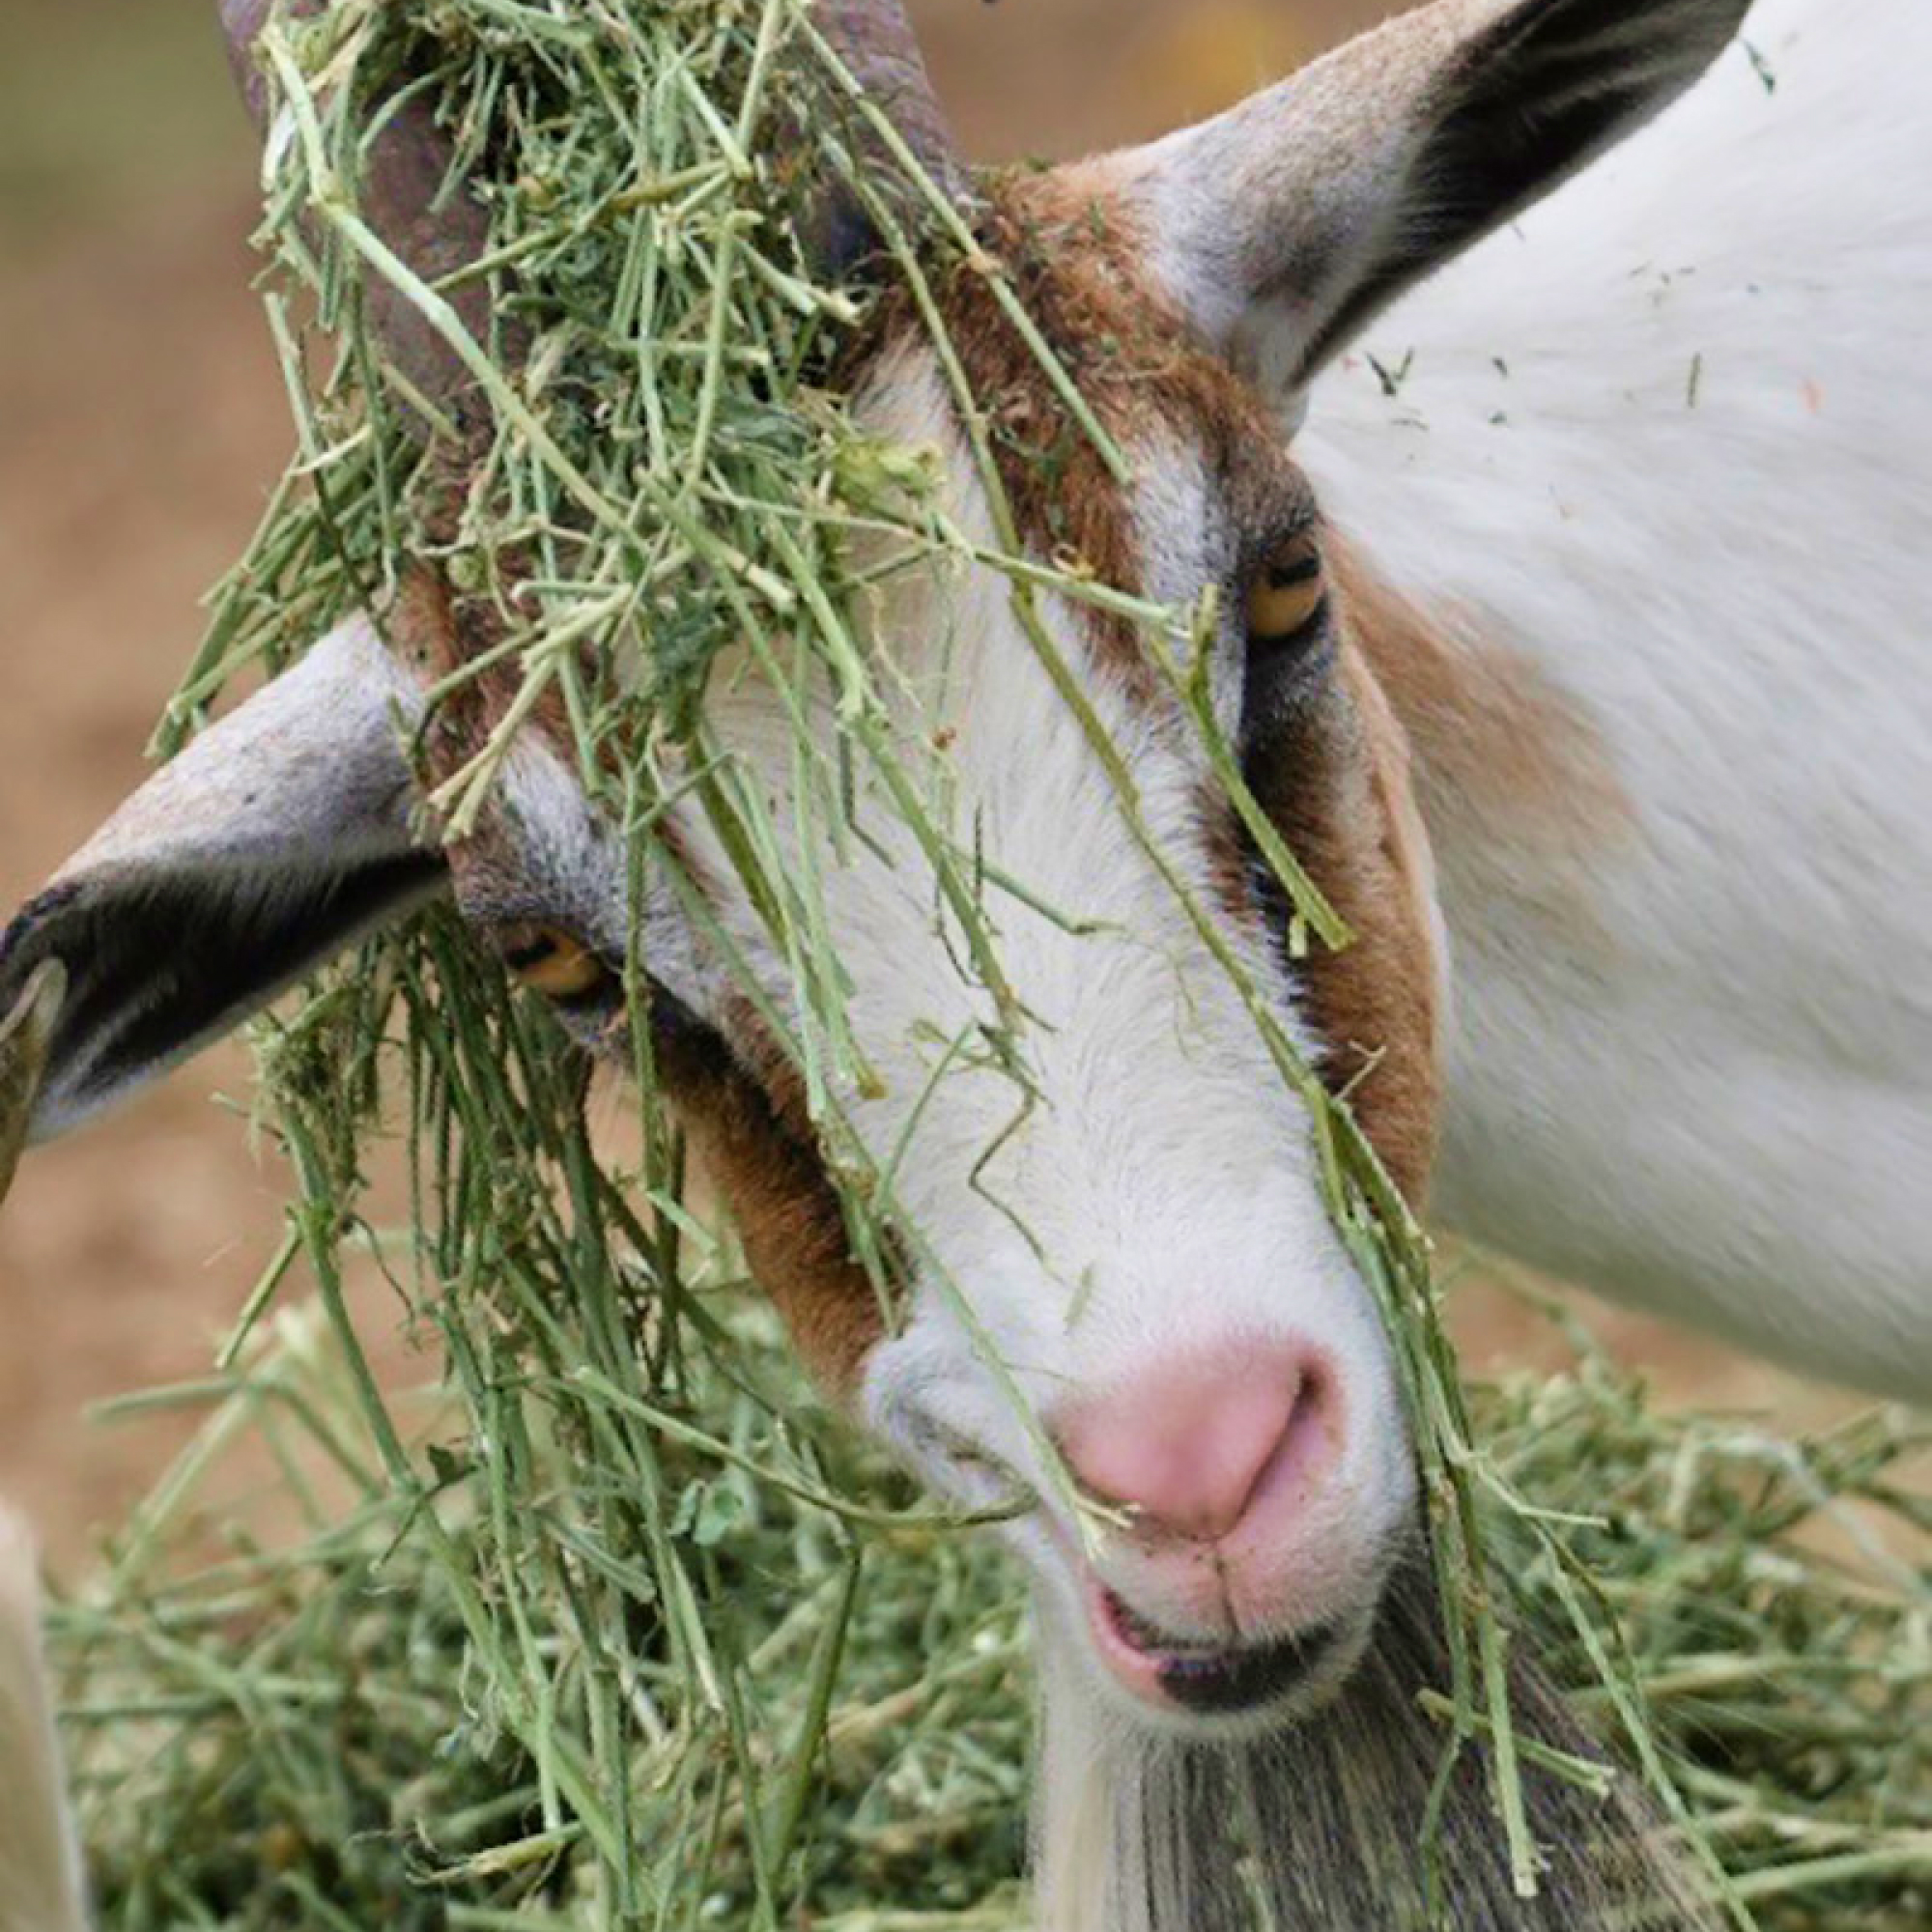 South Florida Society for the Prevention of Cruelty to Animals rescues goats, sheep and cows